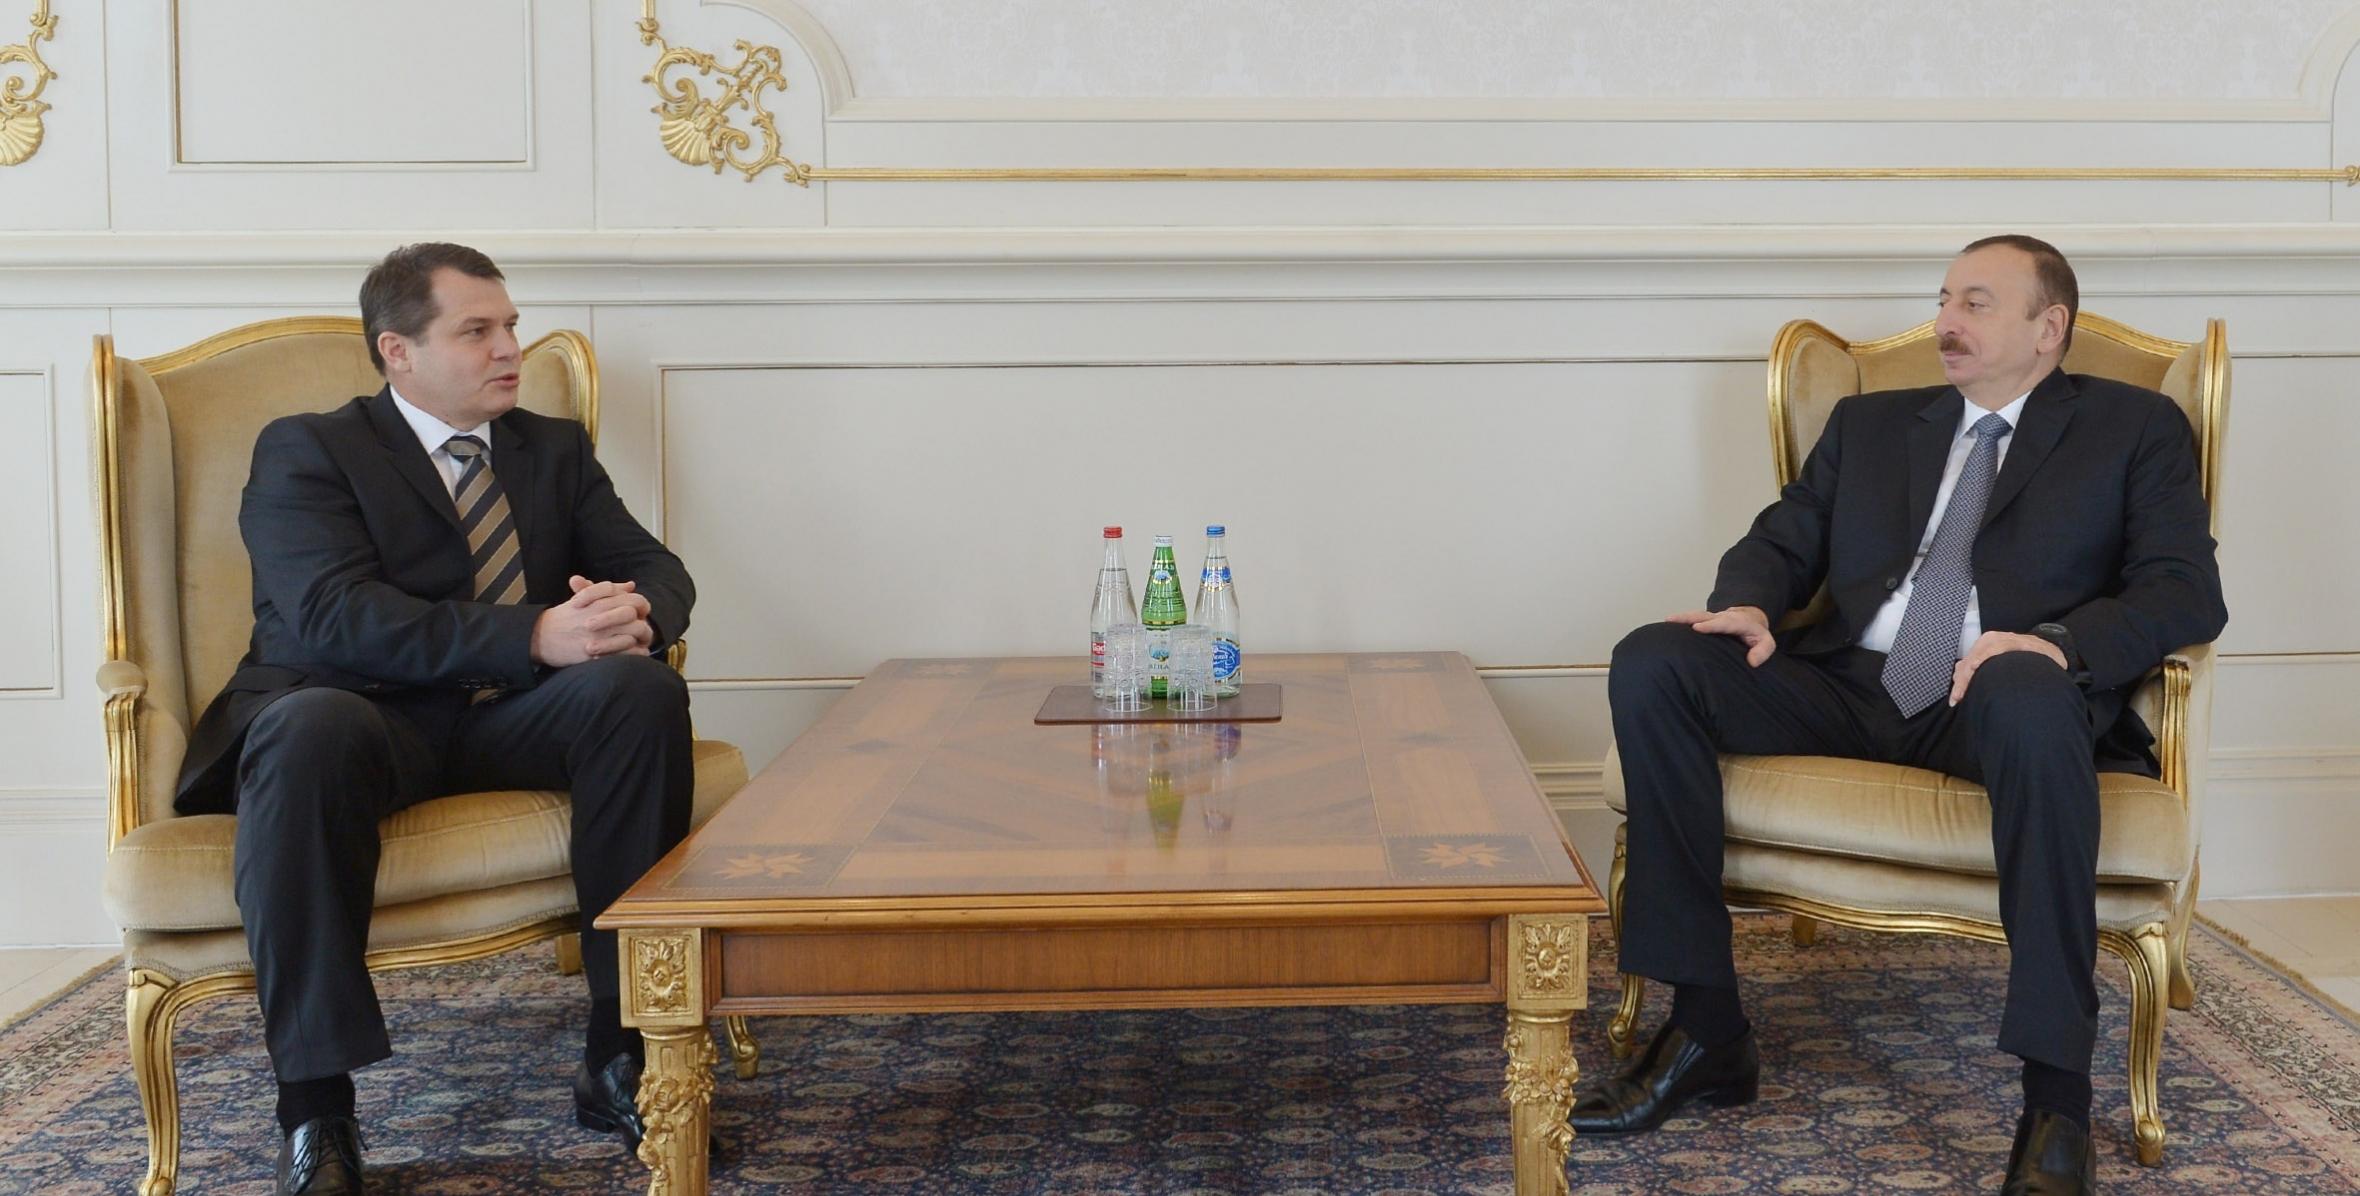 Ilham Aliyev accepted the credentials of the newly-appointed ambassador of the Czech Republic to Azerbaijan